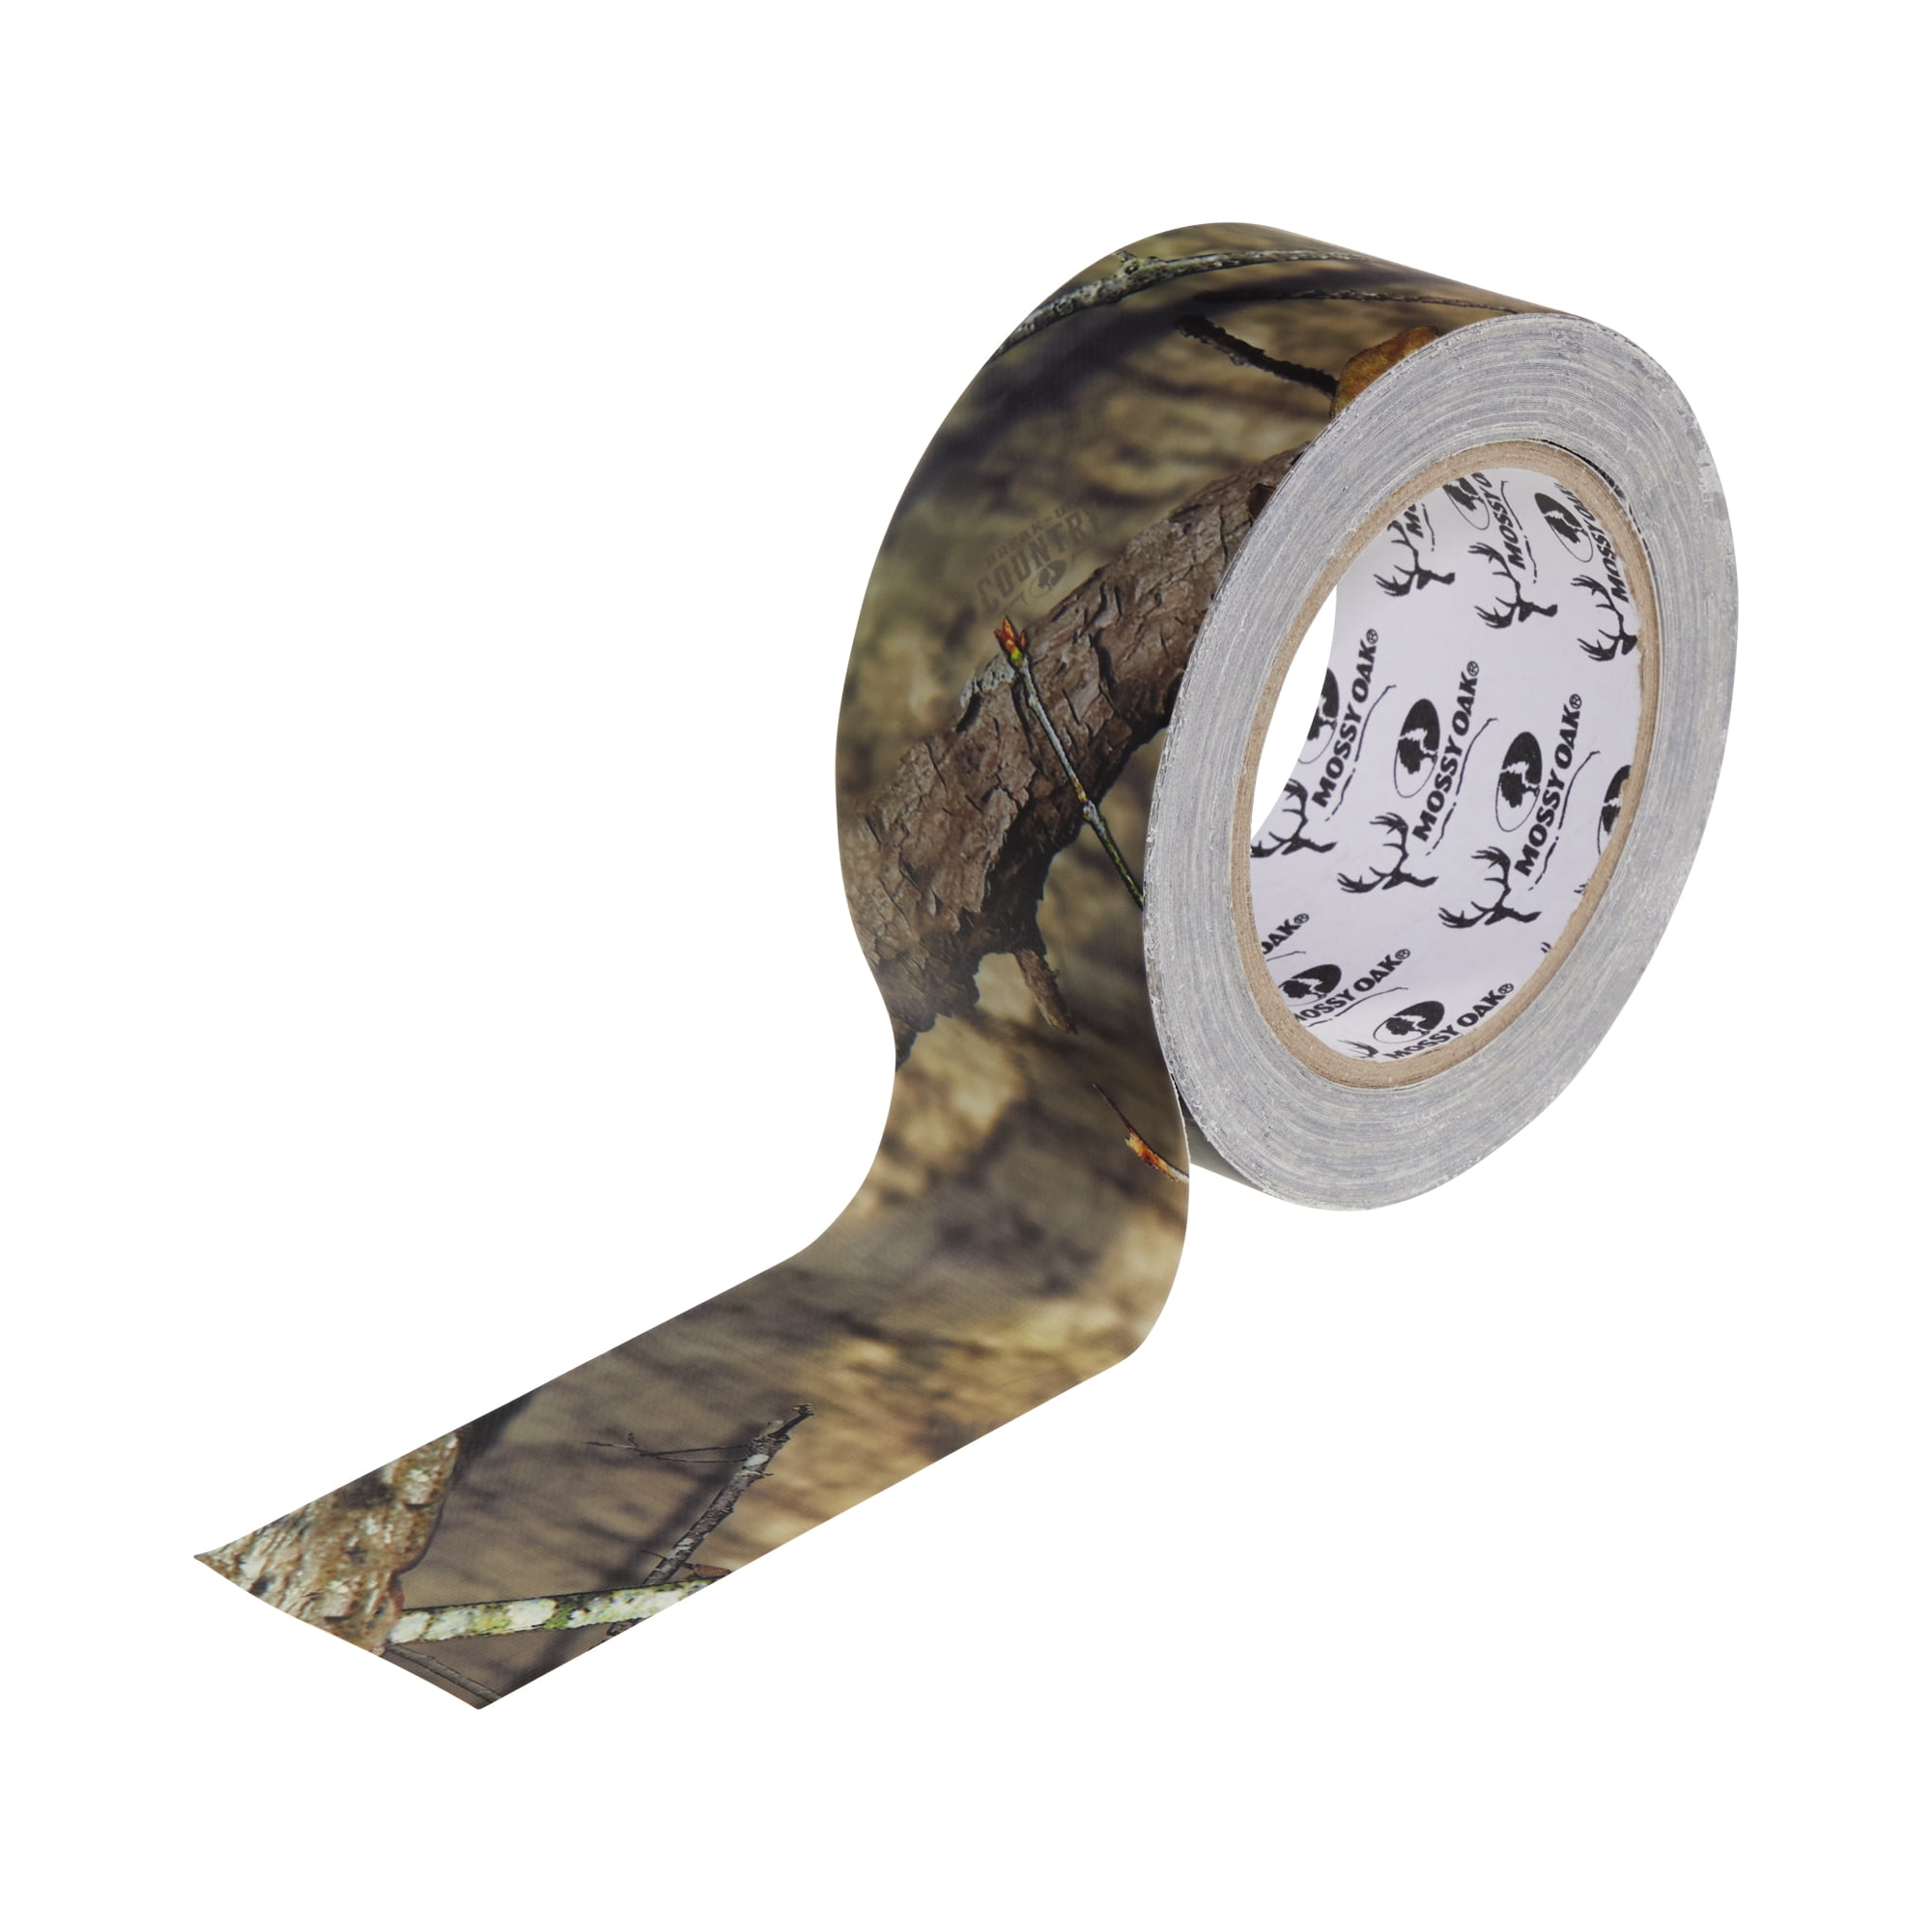 NEW SHURTECH 532159 20YD ROLL CAMOUFLAGE DUCT TAPE 